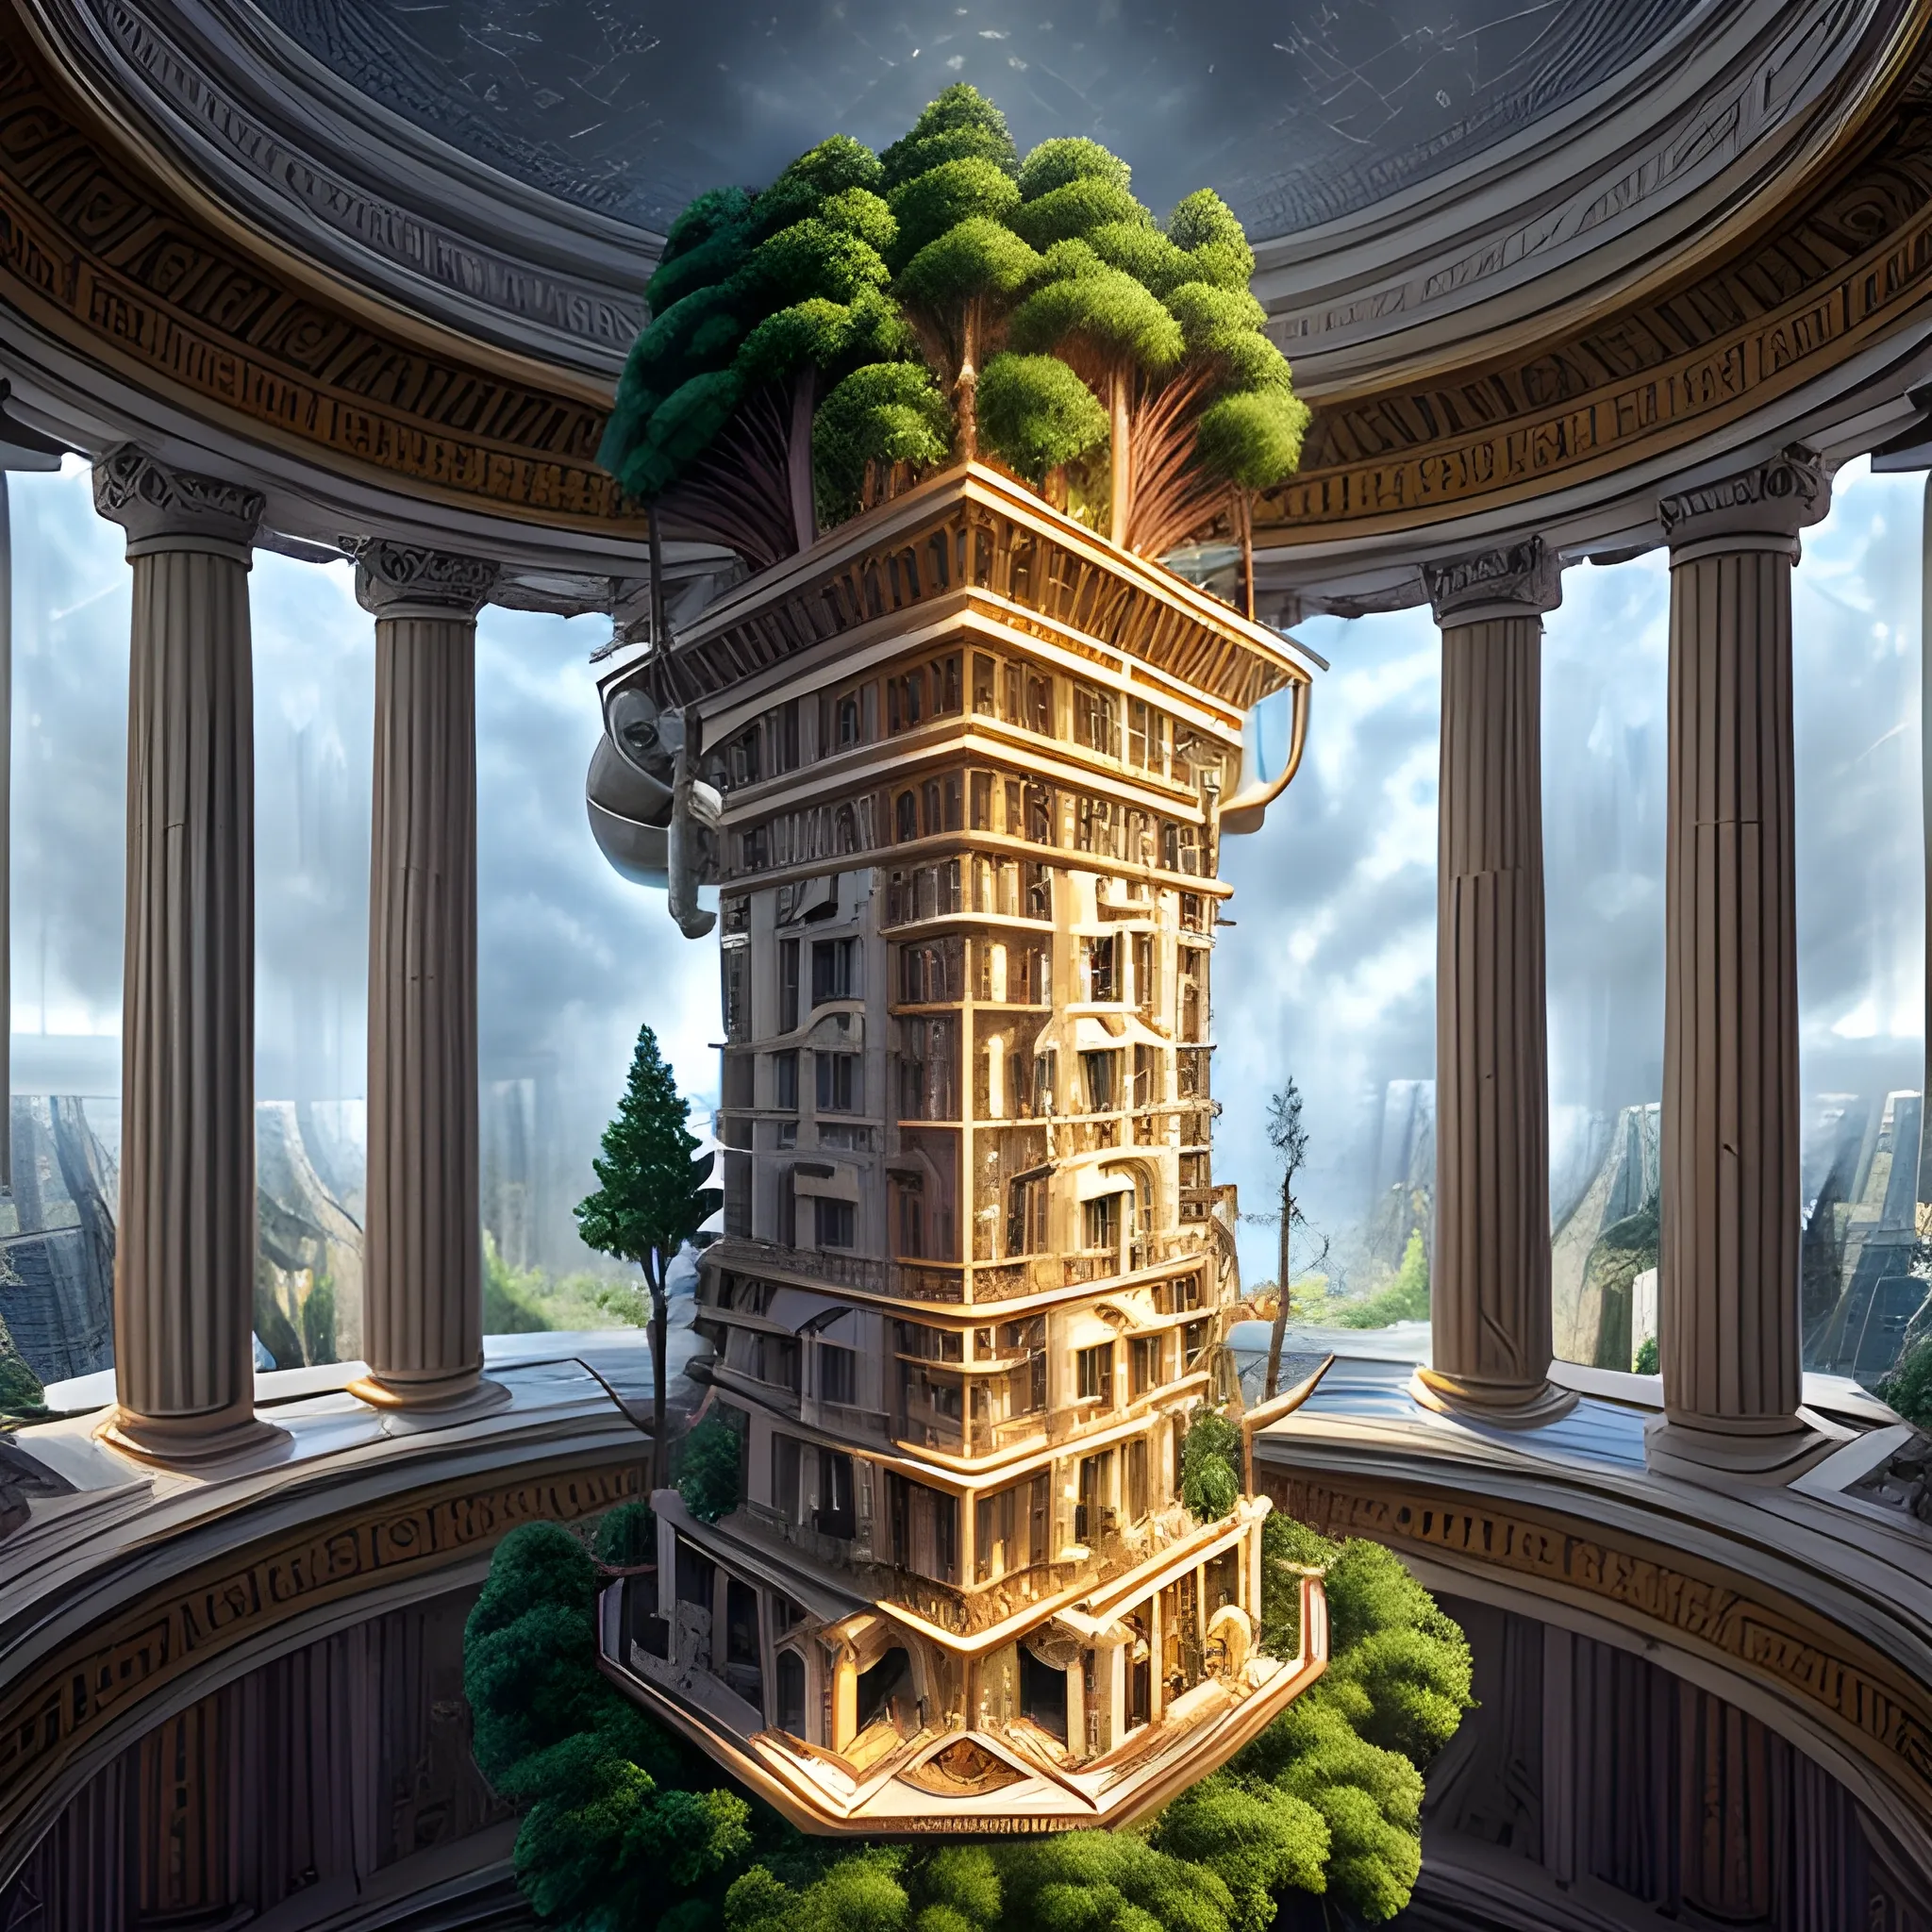 Encapsulation Upside-Down: Construction of Tree Appartment tree by the Greek Gods, hyper-detailed, intricate, delicate, cinematic brilliant stunning intricate meticulously detailed dramatic atmospheric maximalist digital